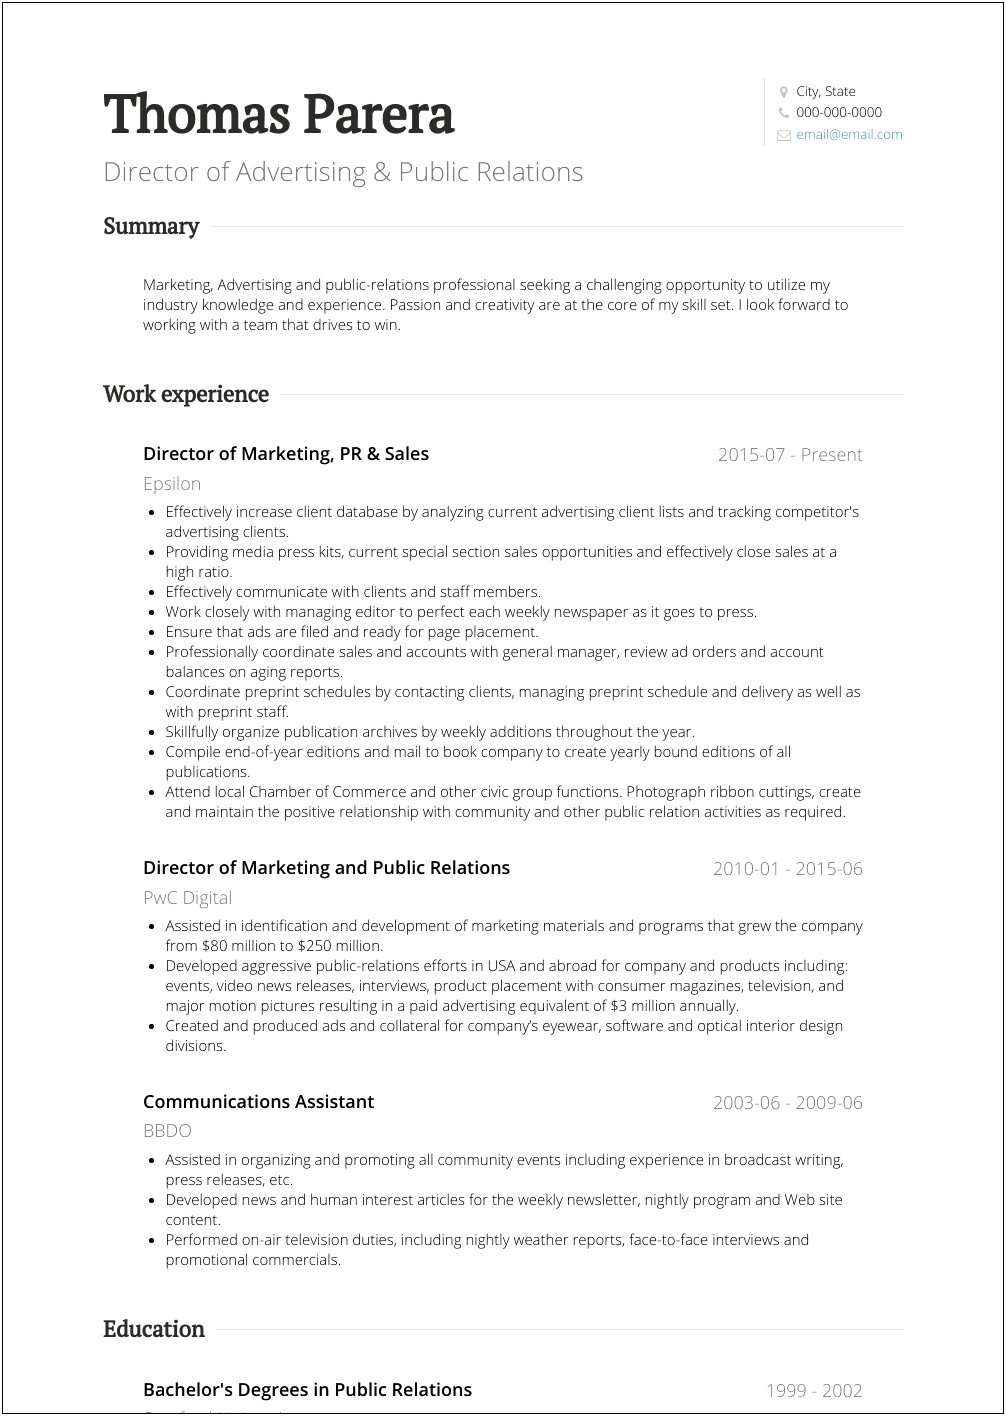 Profile Summary For Public Relations Resume